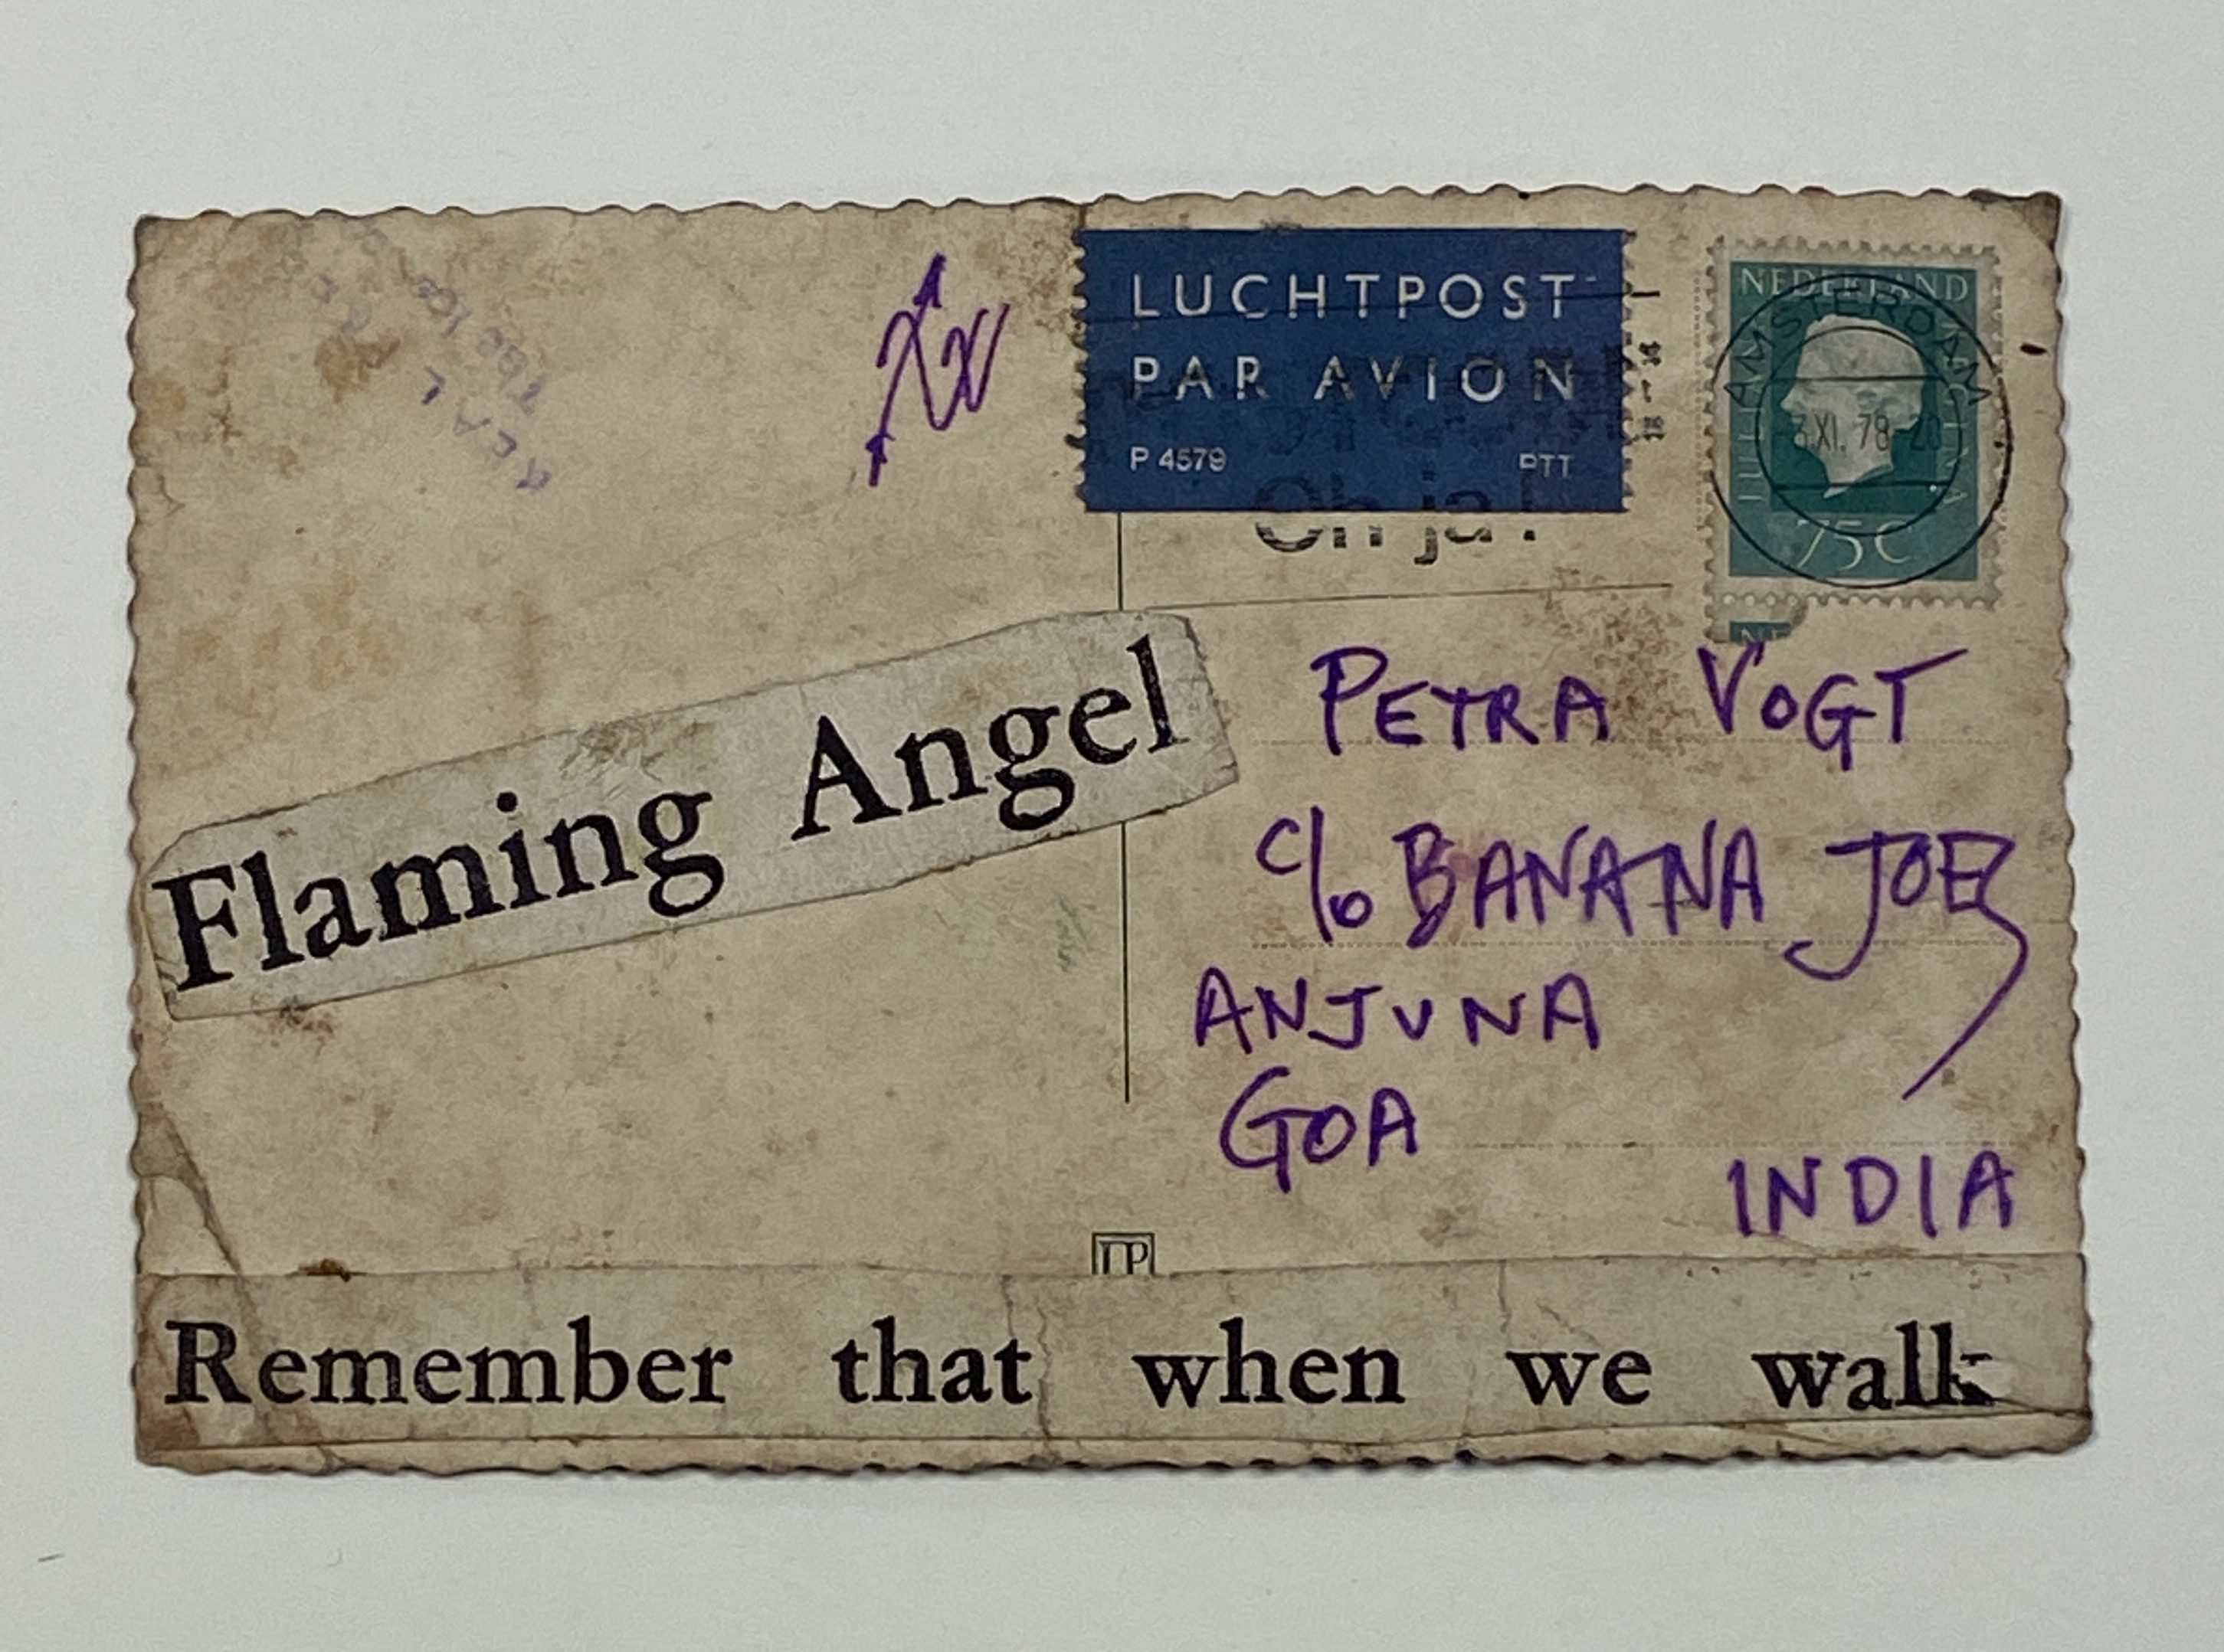 The text side of a commercial postcard with rippled edges, heavily soiled. Printed text is collaged onto the background, "Flaming angel / Remember that when we walk". The address is in violet ink and there are stamps. 